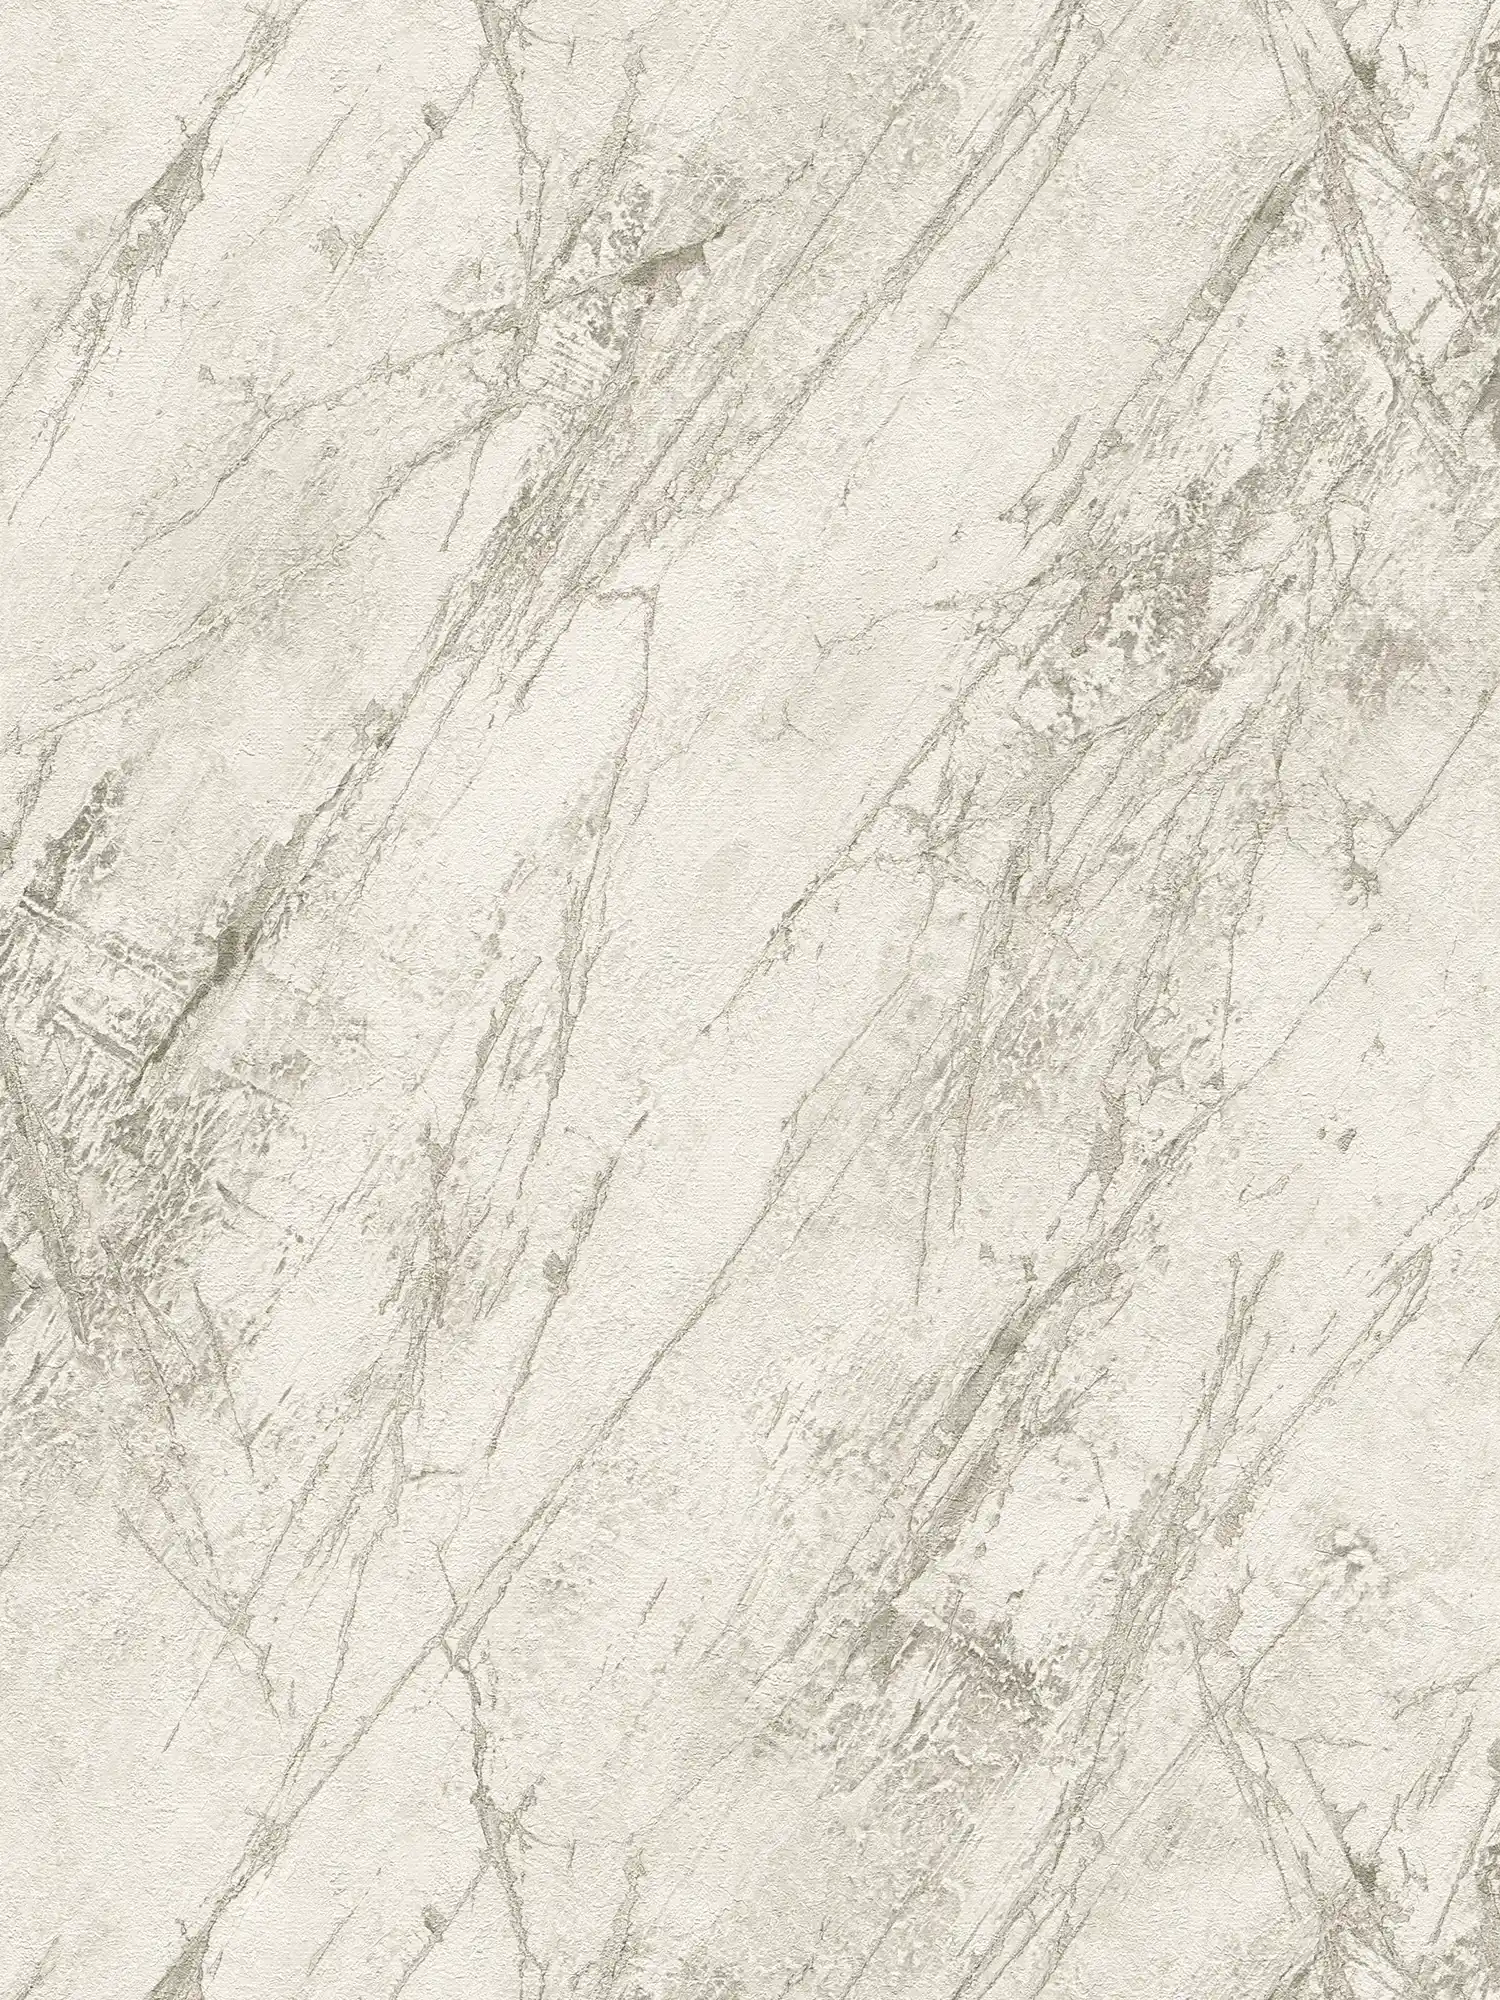 Marble wallpaper with metallic sheen and texture design
